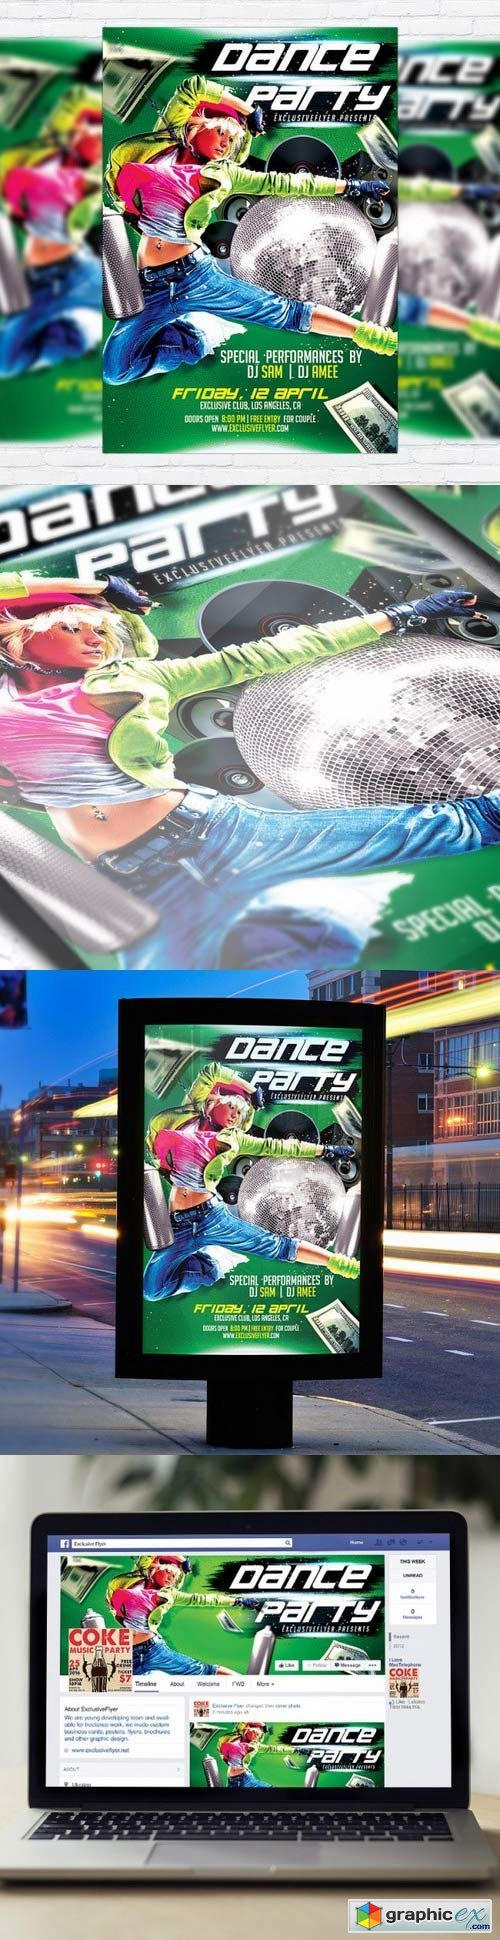 Dance Party Flyer PSD Template + Facebook Cover